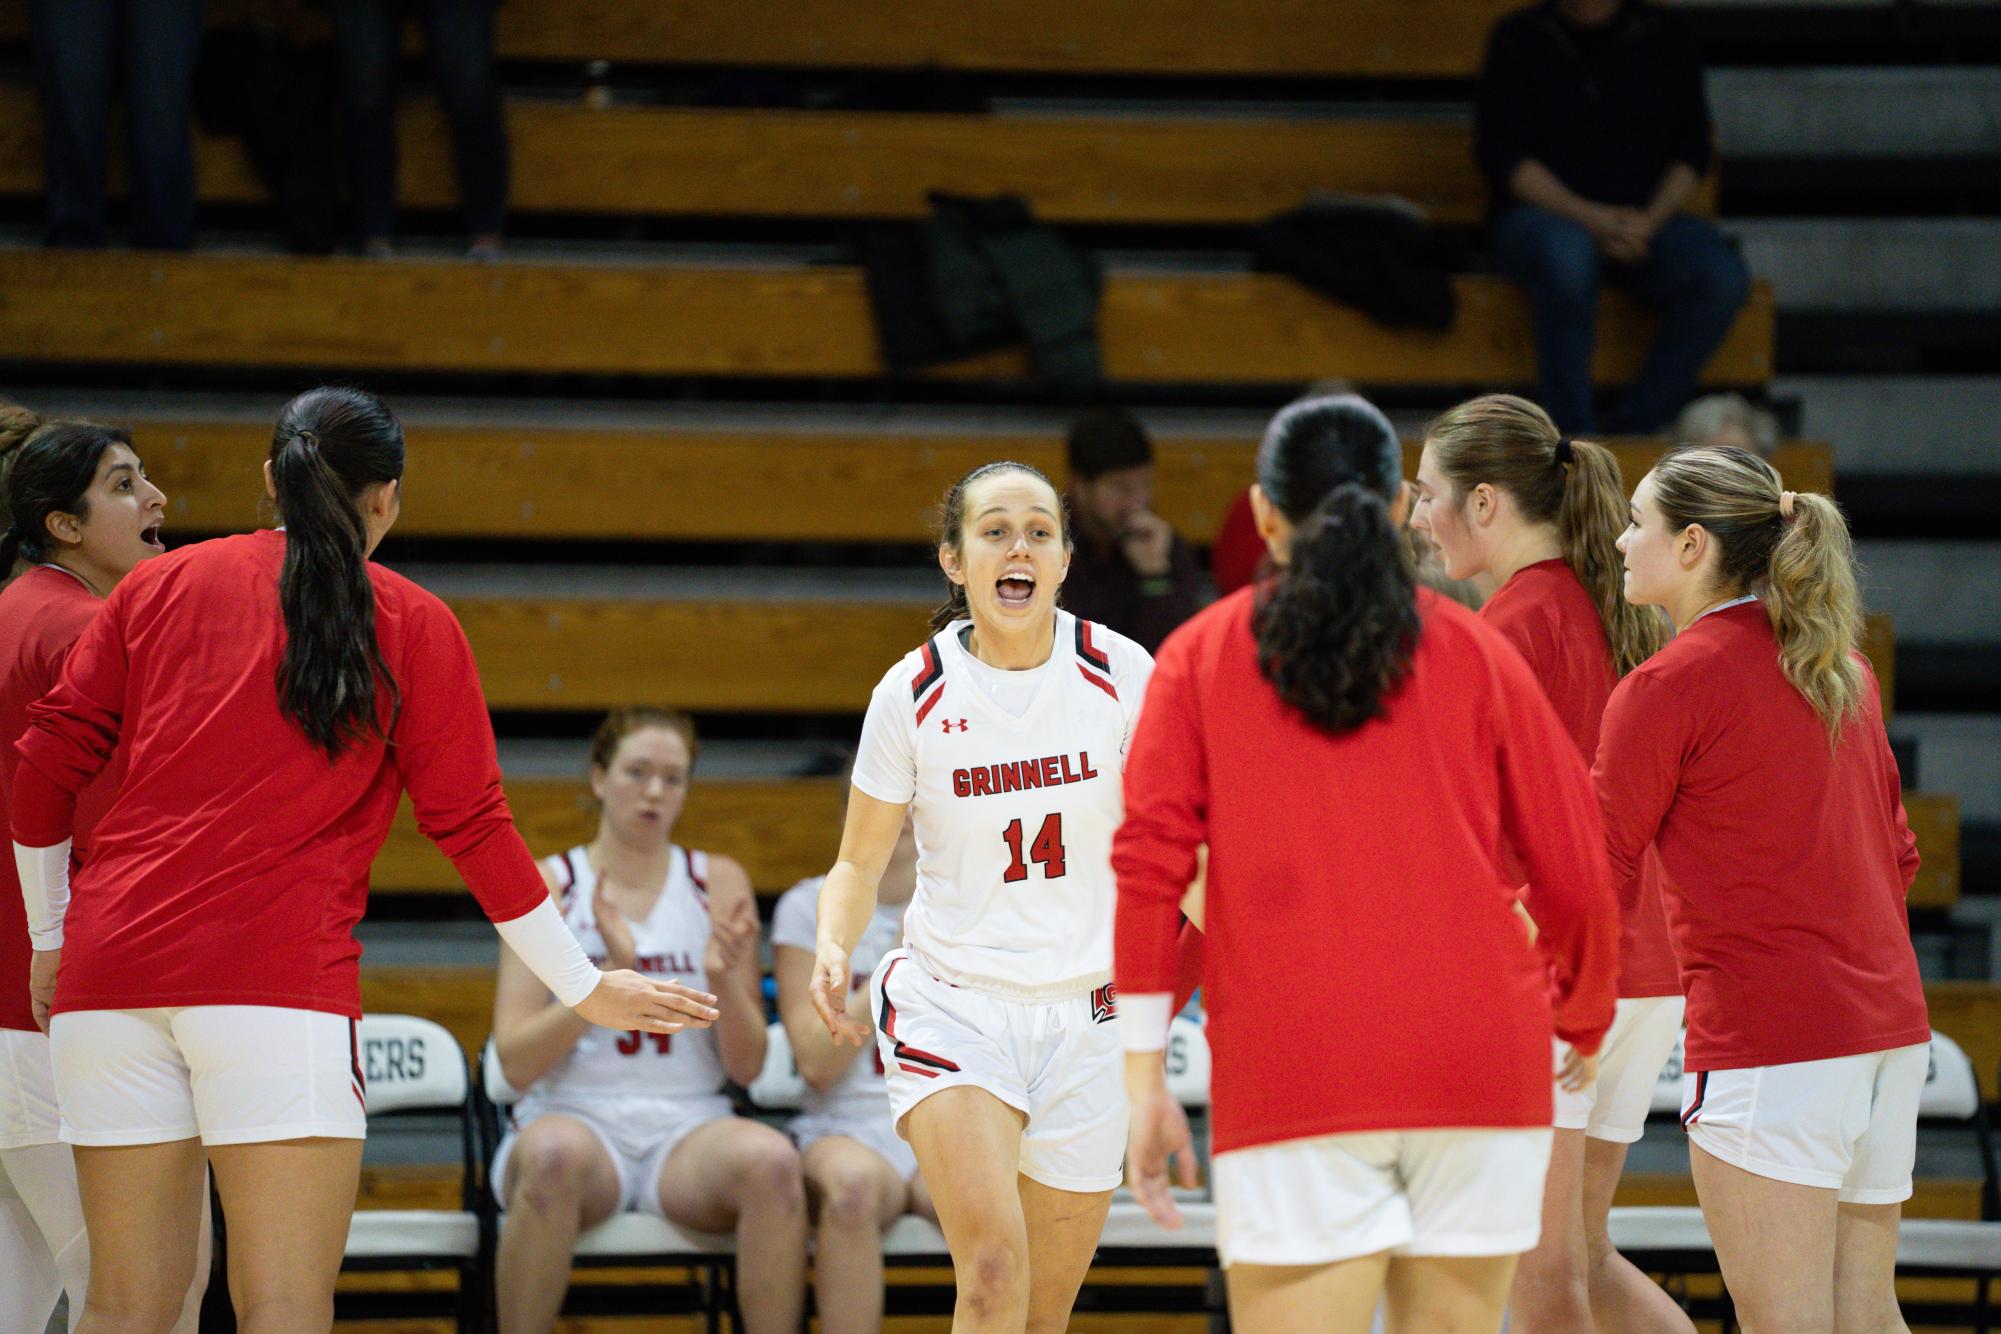 Erin Lillis `24 celebrates with her teammates during the Feb. 7 game against Illinois College. The Pioneers won 78-63 to secure Head Women’s Basketball Coach Dana Harrold’s 100th career victory.